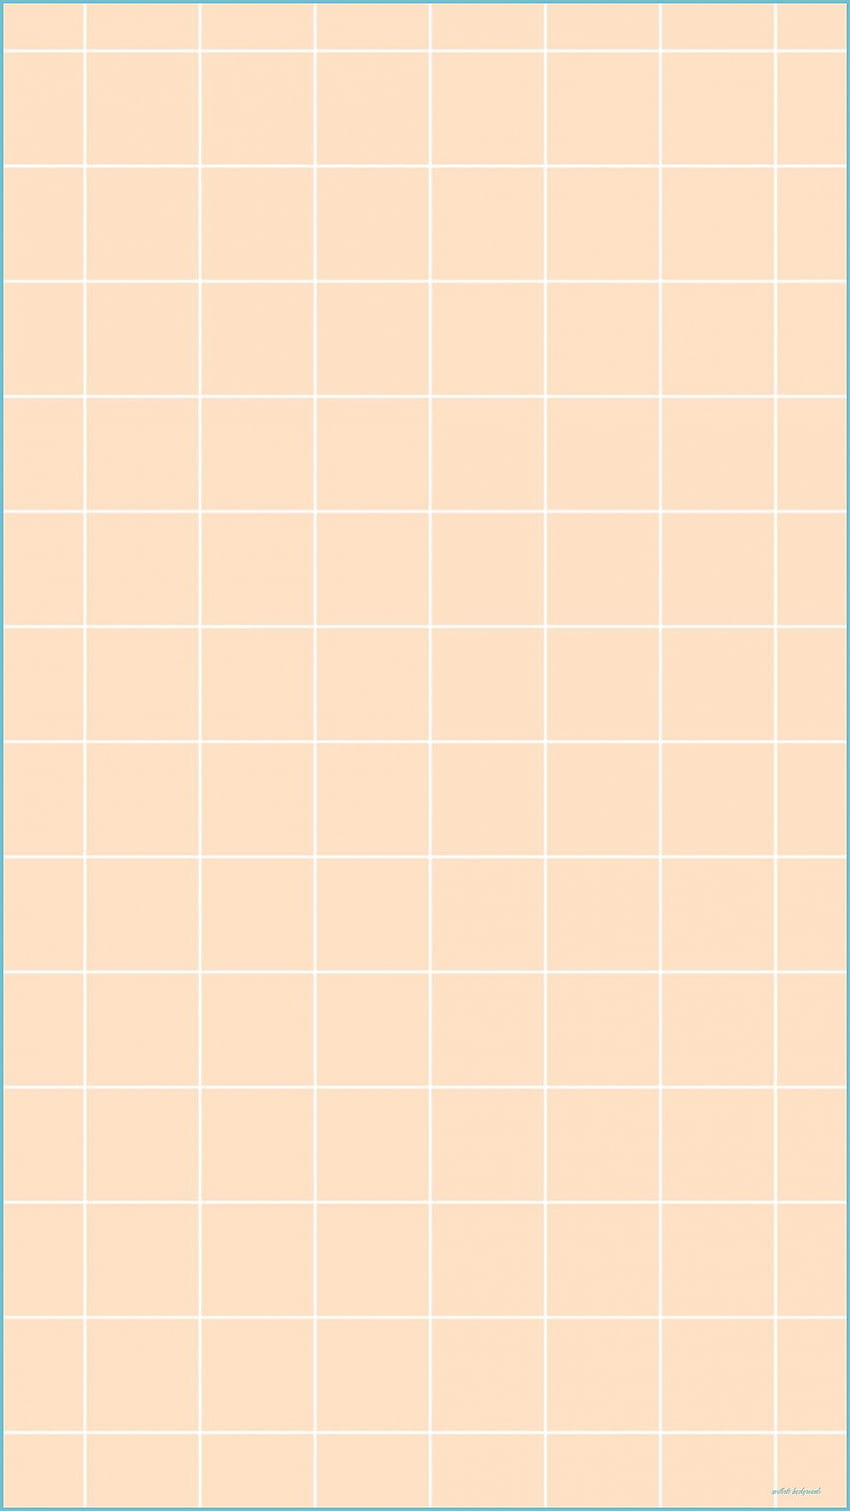 Gridlines on a peach colored background - Grid